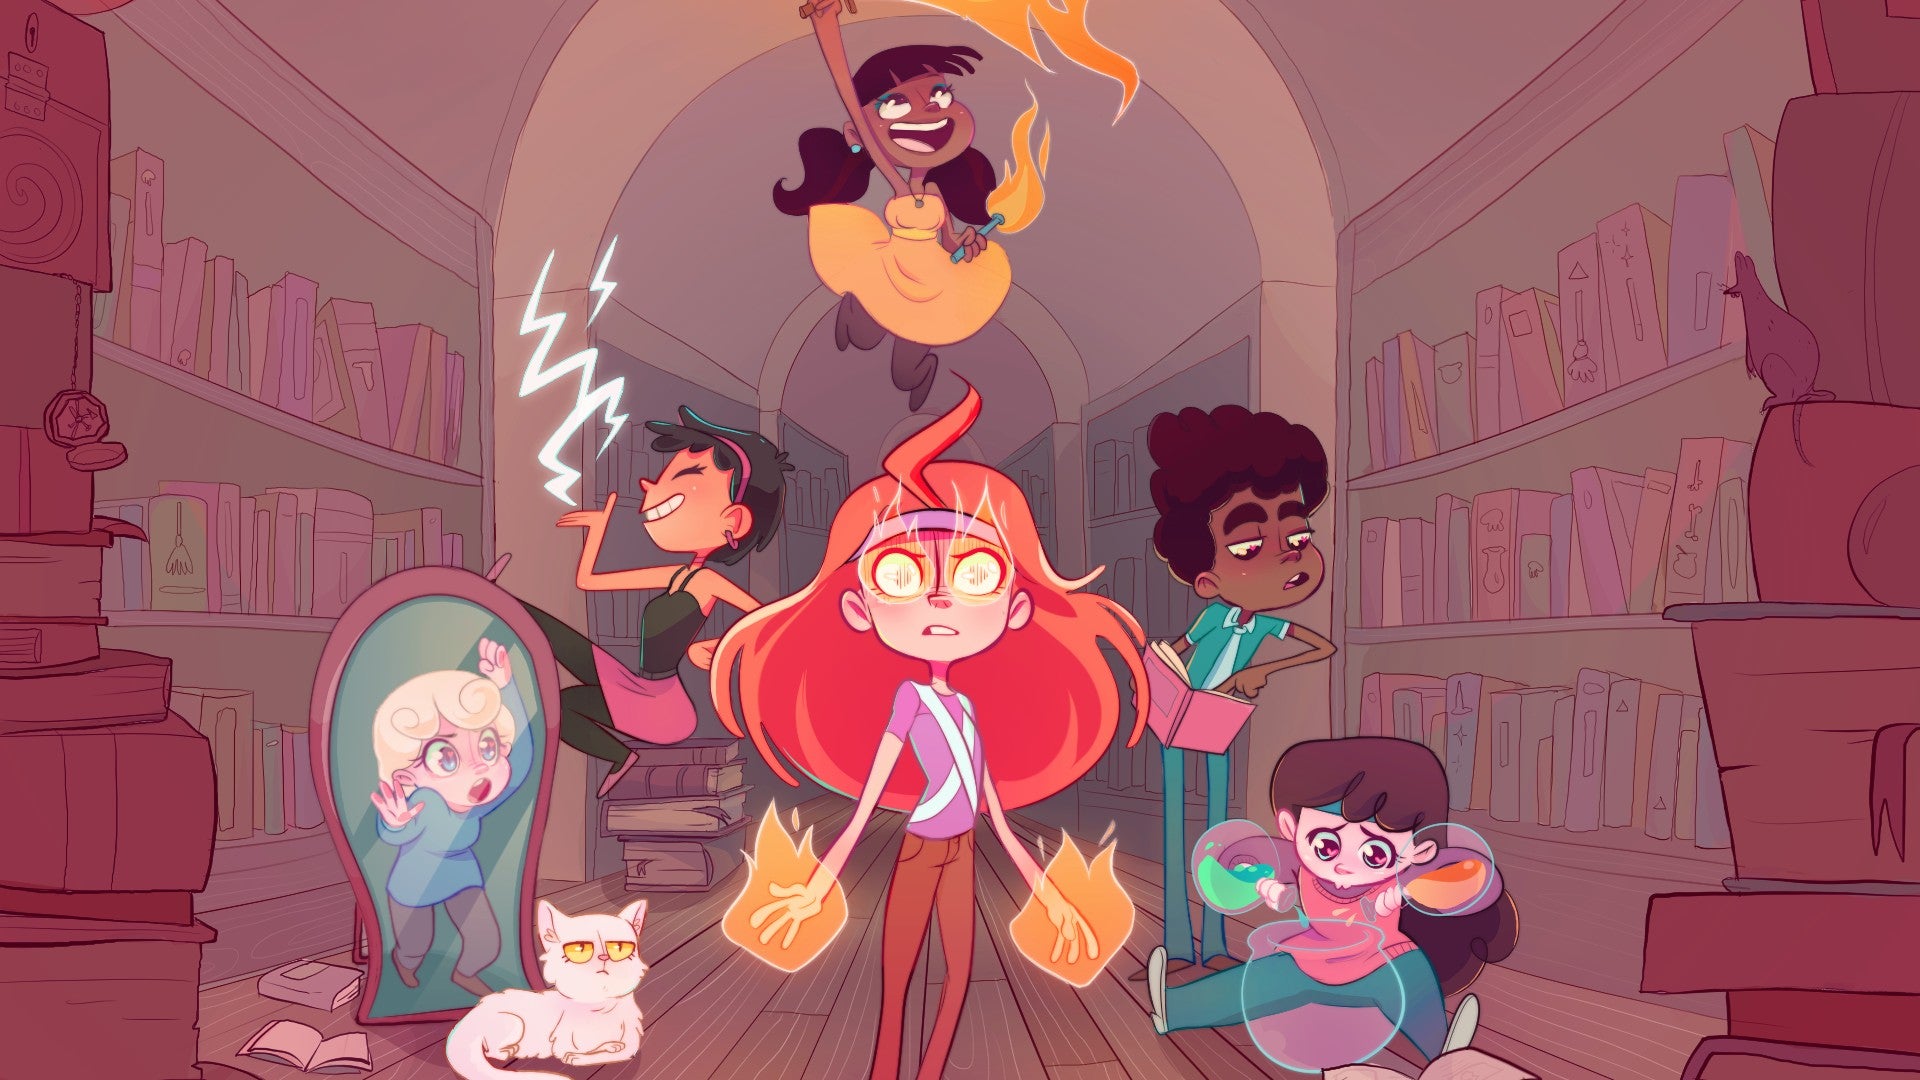 Art of Ikenfell's main characters using various spells and surrounded by books.